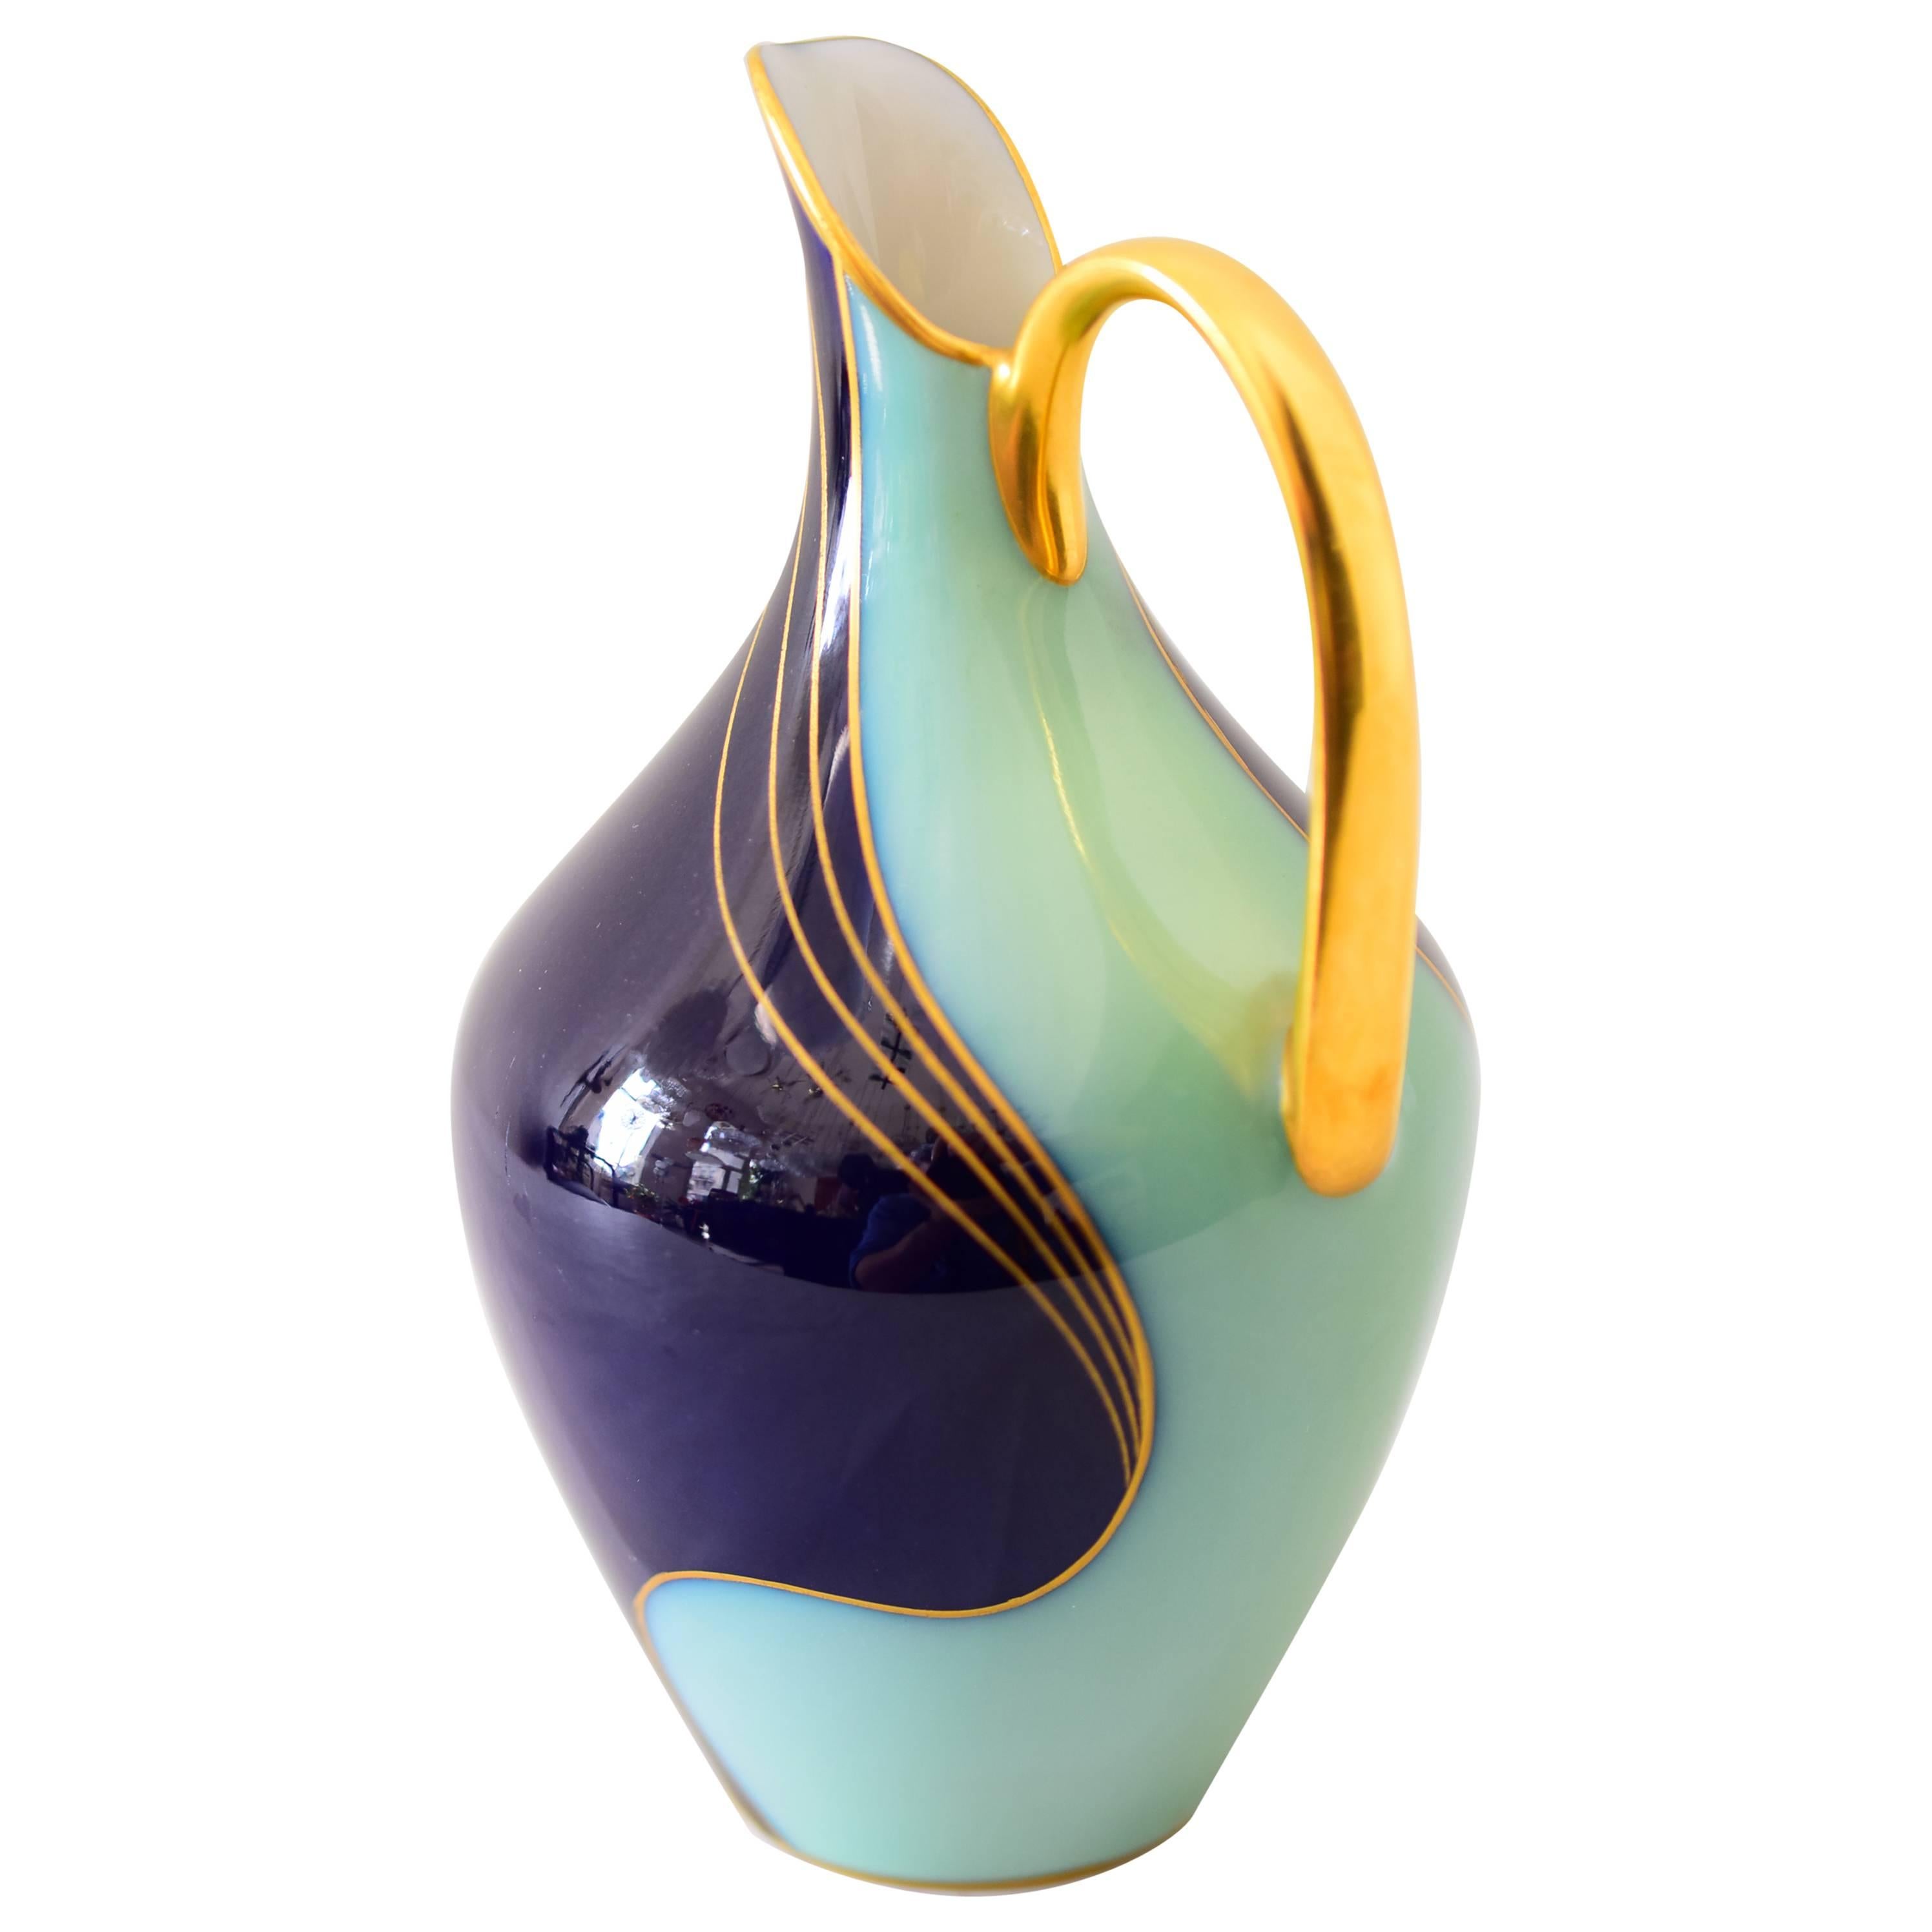 Very Beautiful Porcelain Pitcher by Hutschenreuther